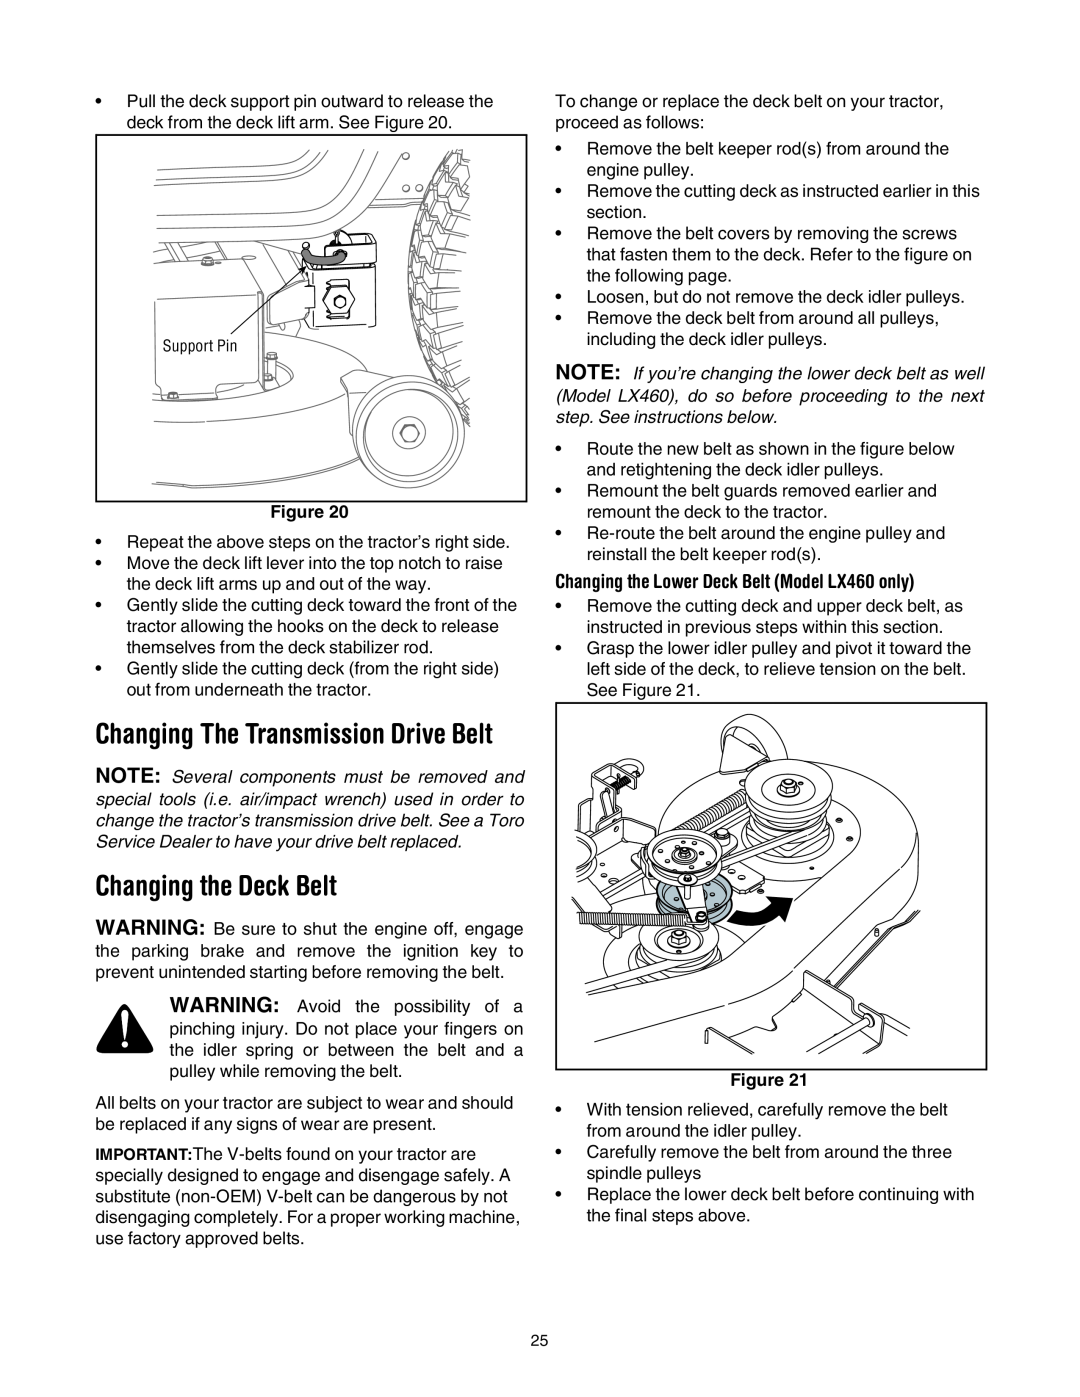 Toro 71430, 71432 manual Changing the Deck Belt, Changing The Transmission Drive Belt 